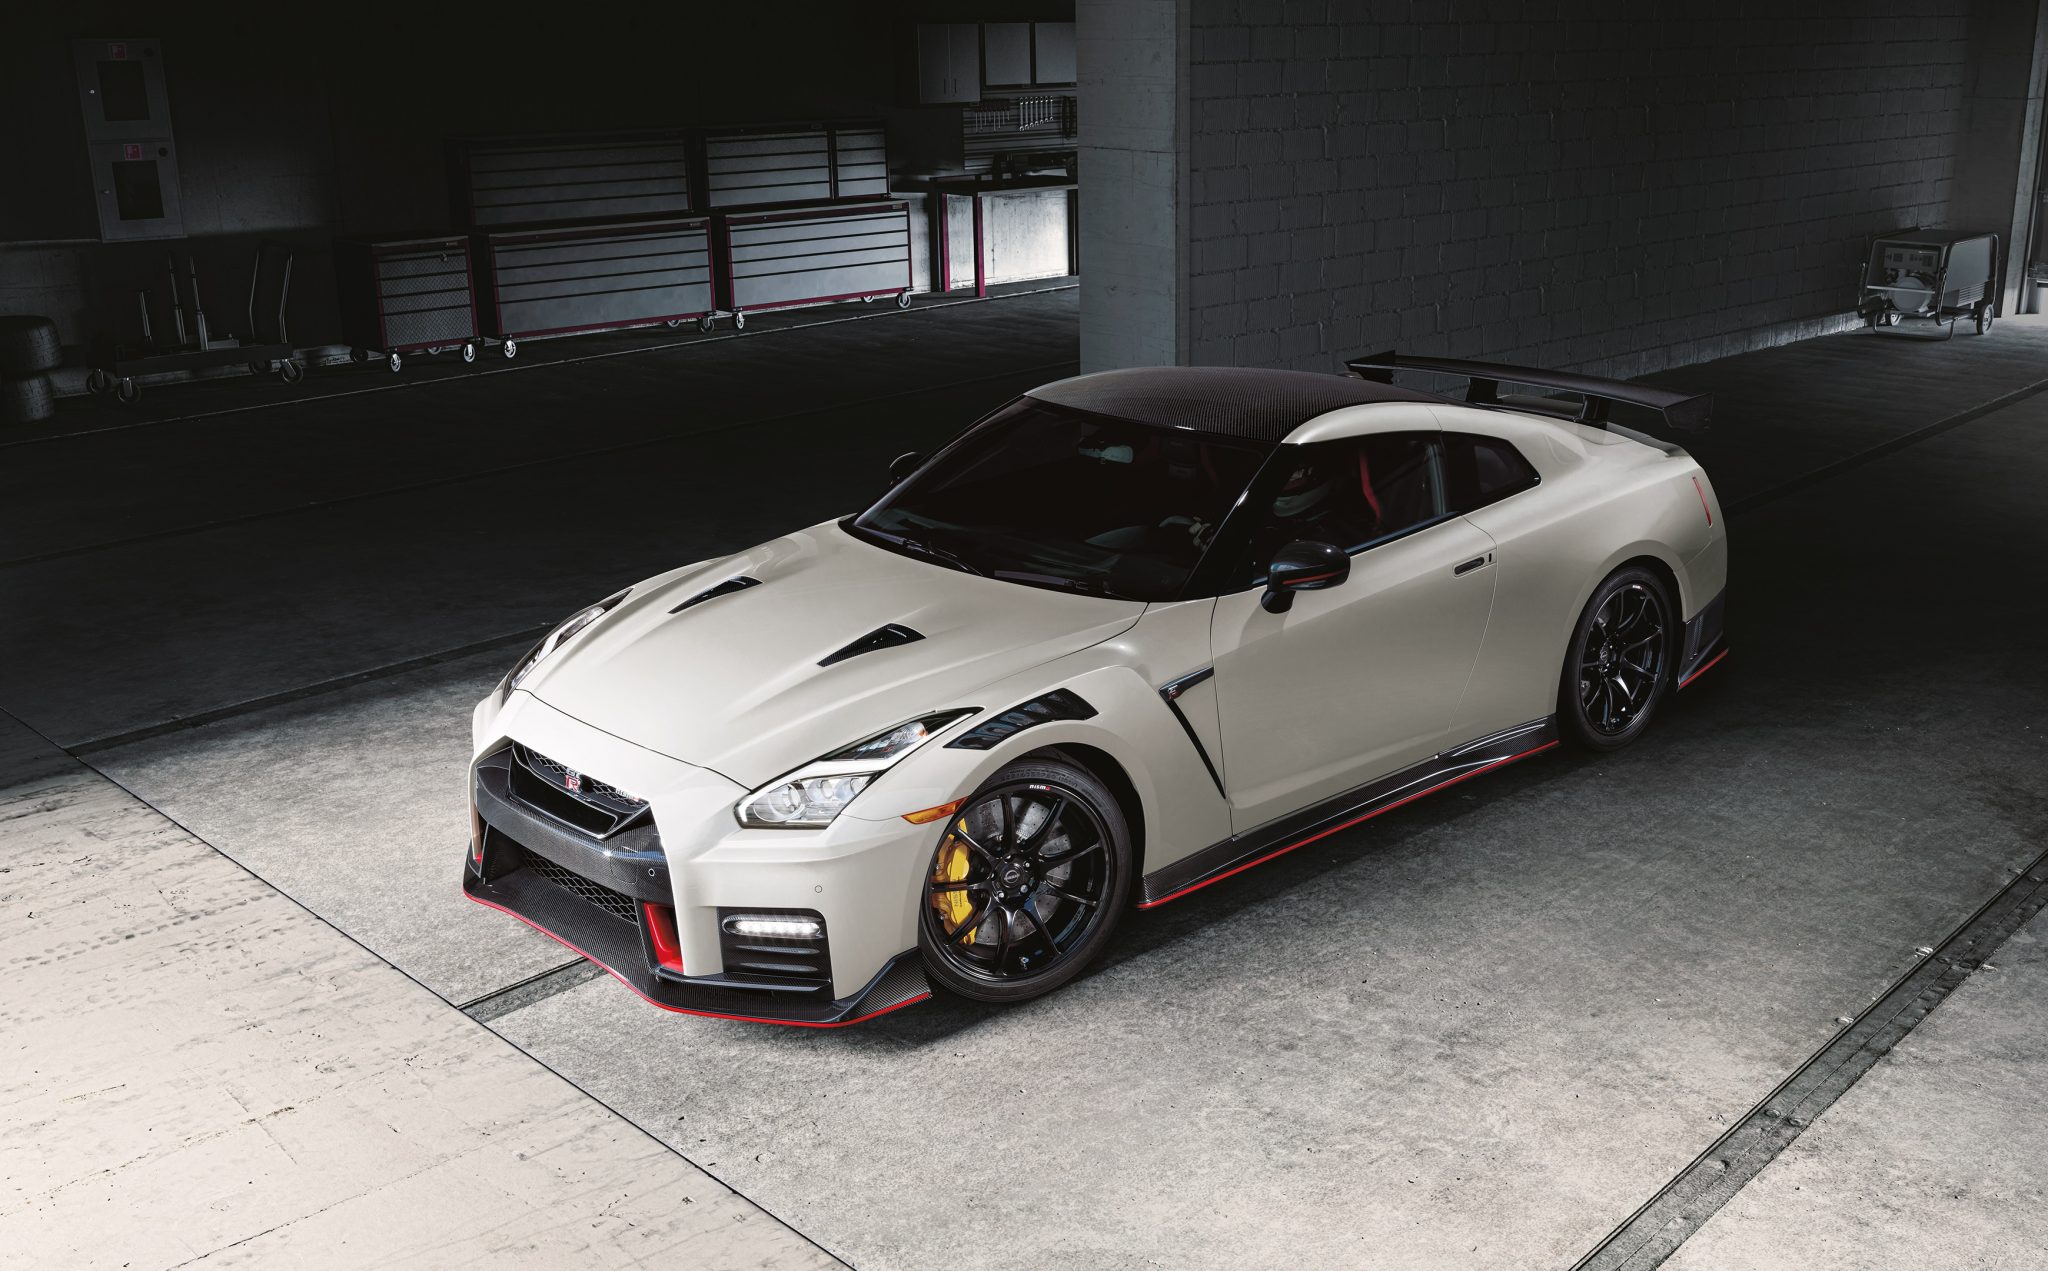 https://www.goodcarbadcar.net/wp-content/uploads/2011/01/Nissan-GT-R-scaled.jpeg